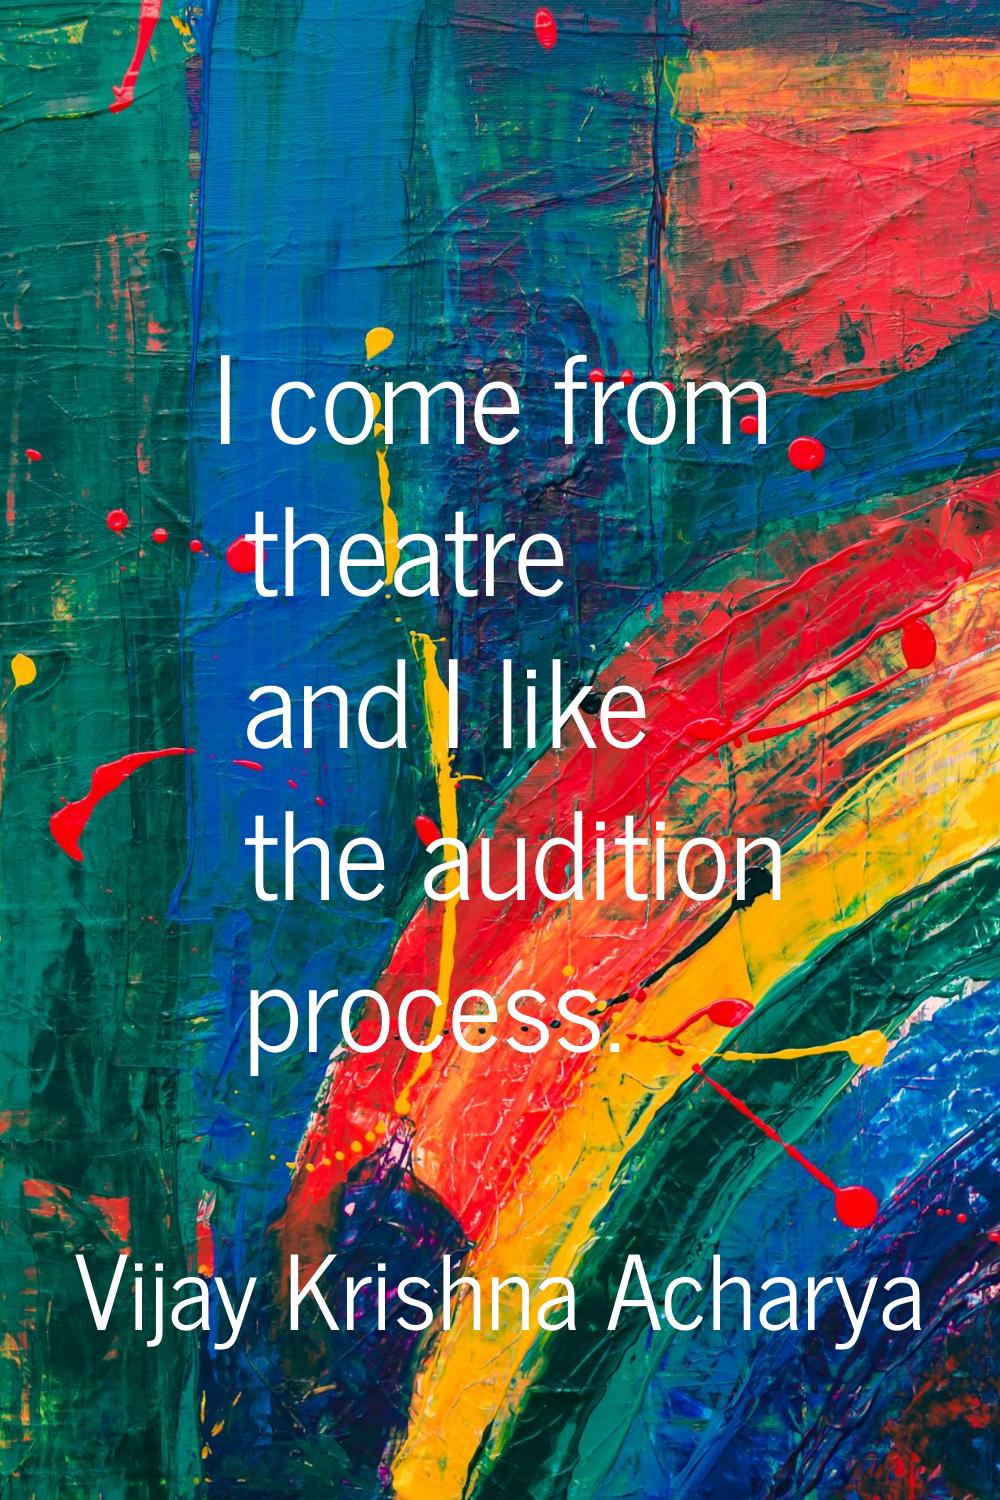 I come from theatre and I like the audition process.